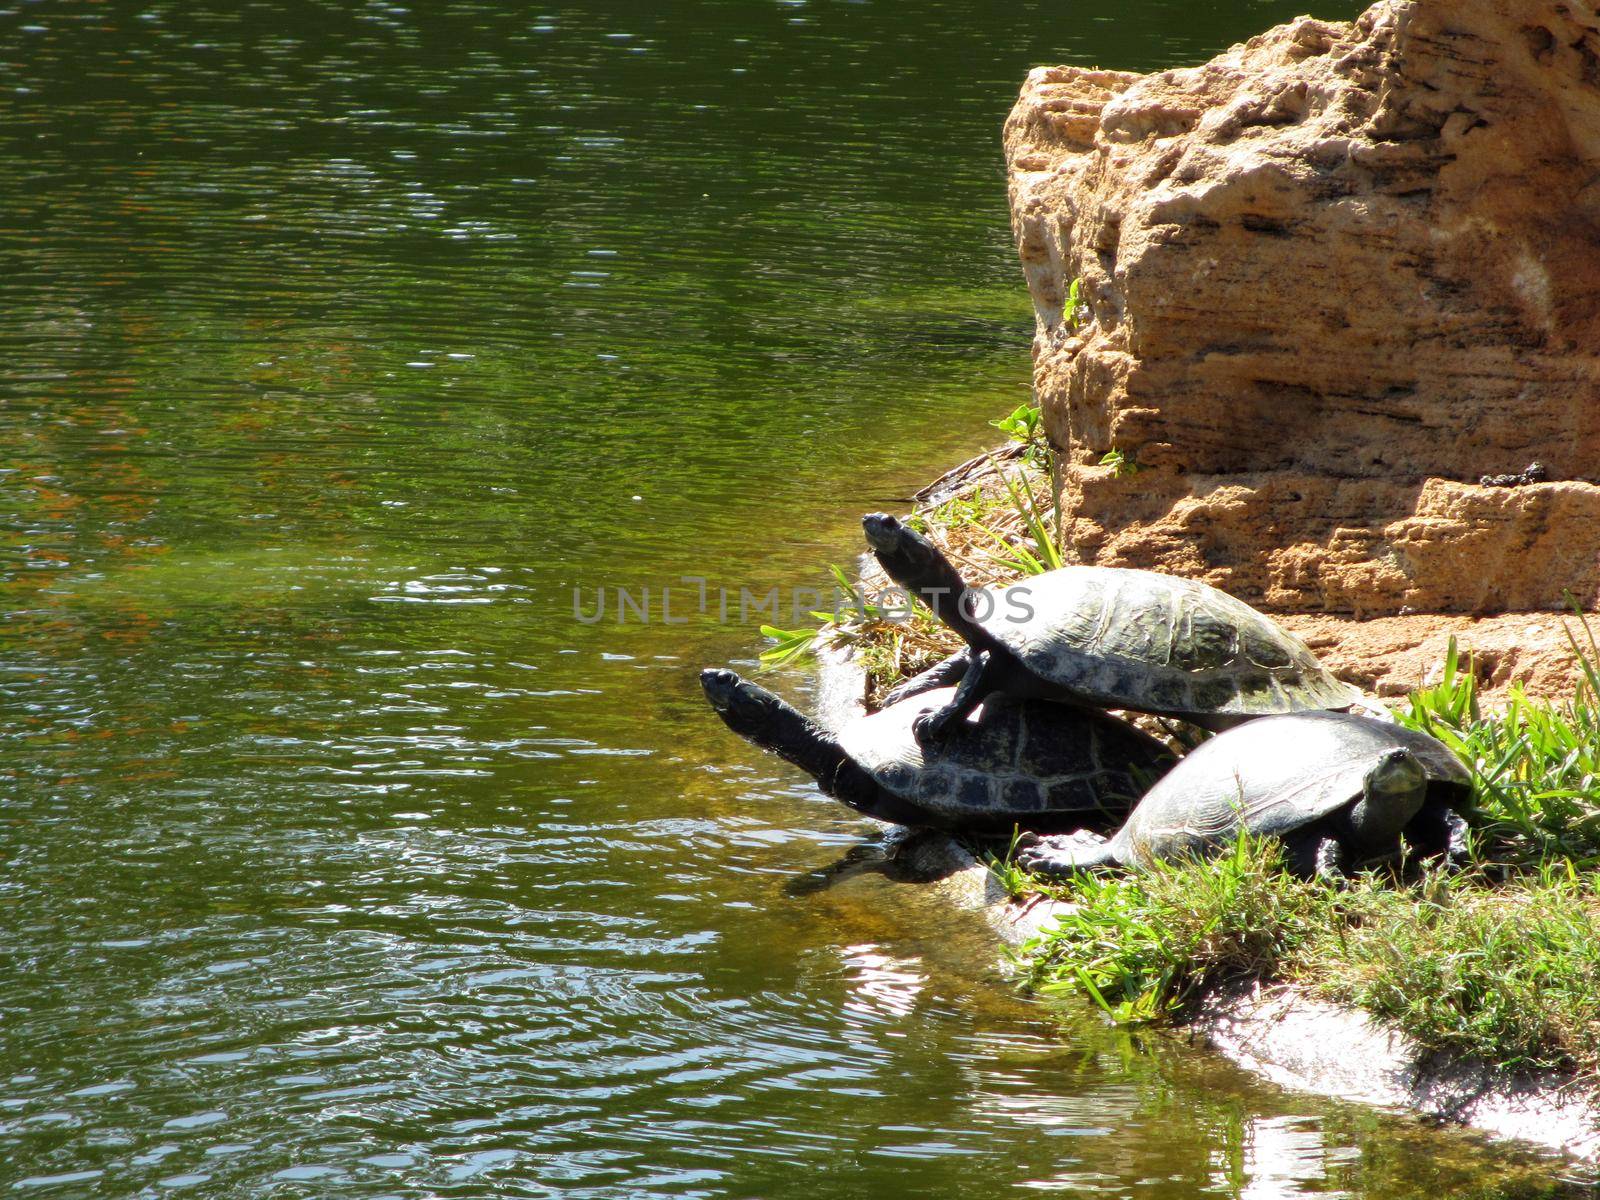 One Turtles stand on top another turtles back with another turtle hanging out.